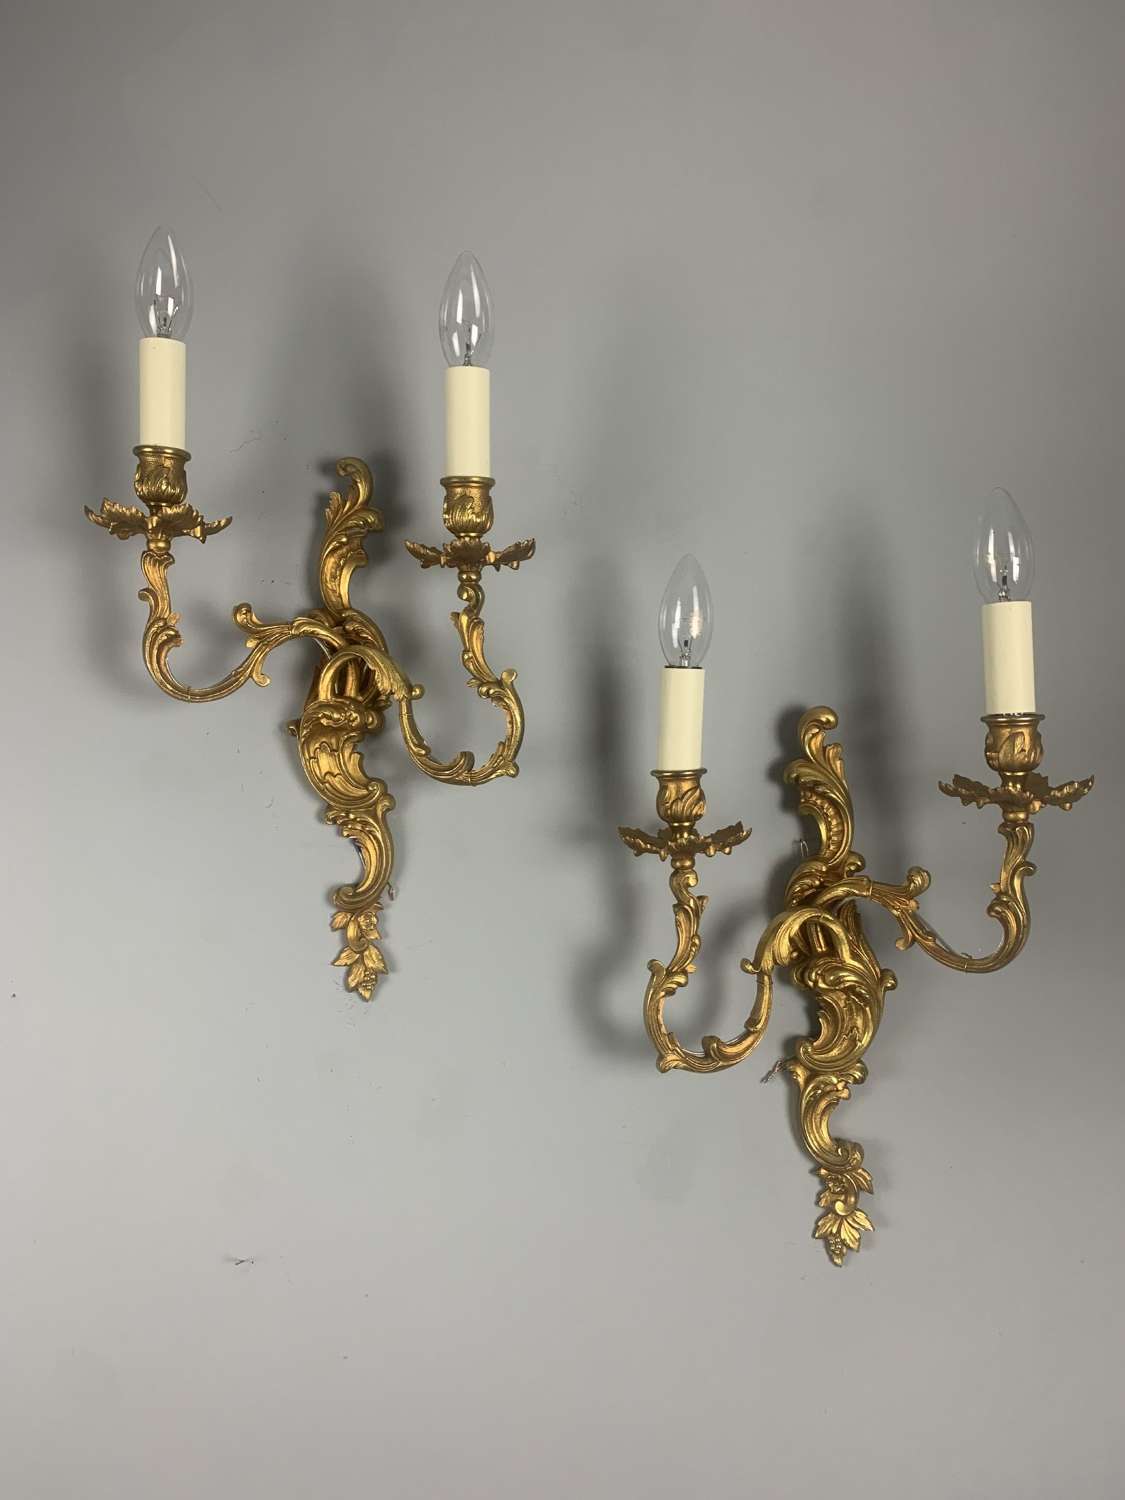 Pair Of Ornate French Gilt Brass Wall Lights, Rewired